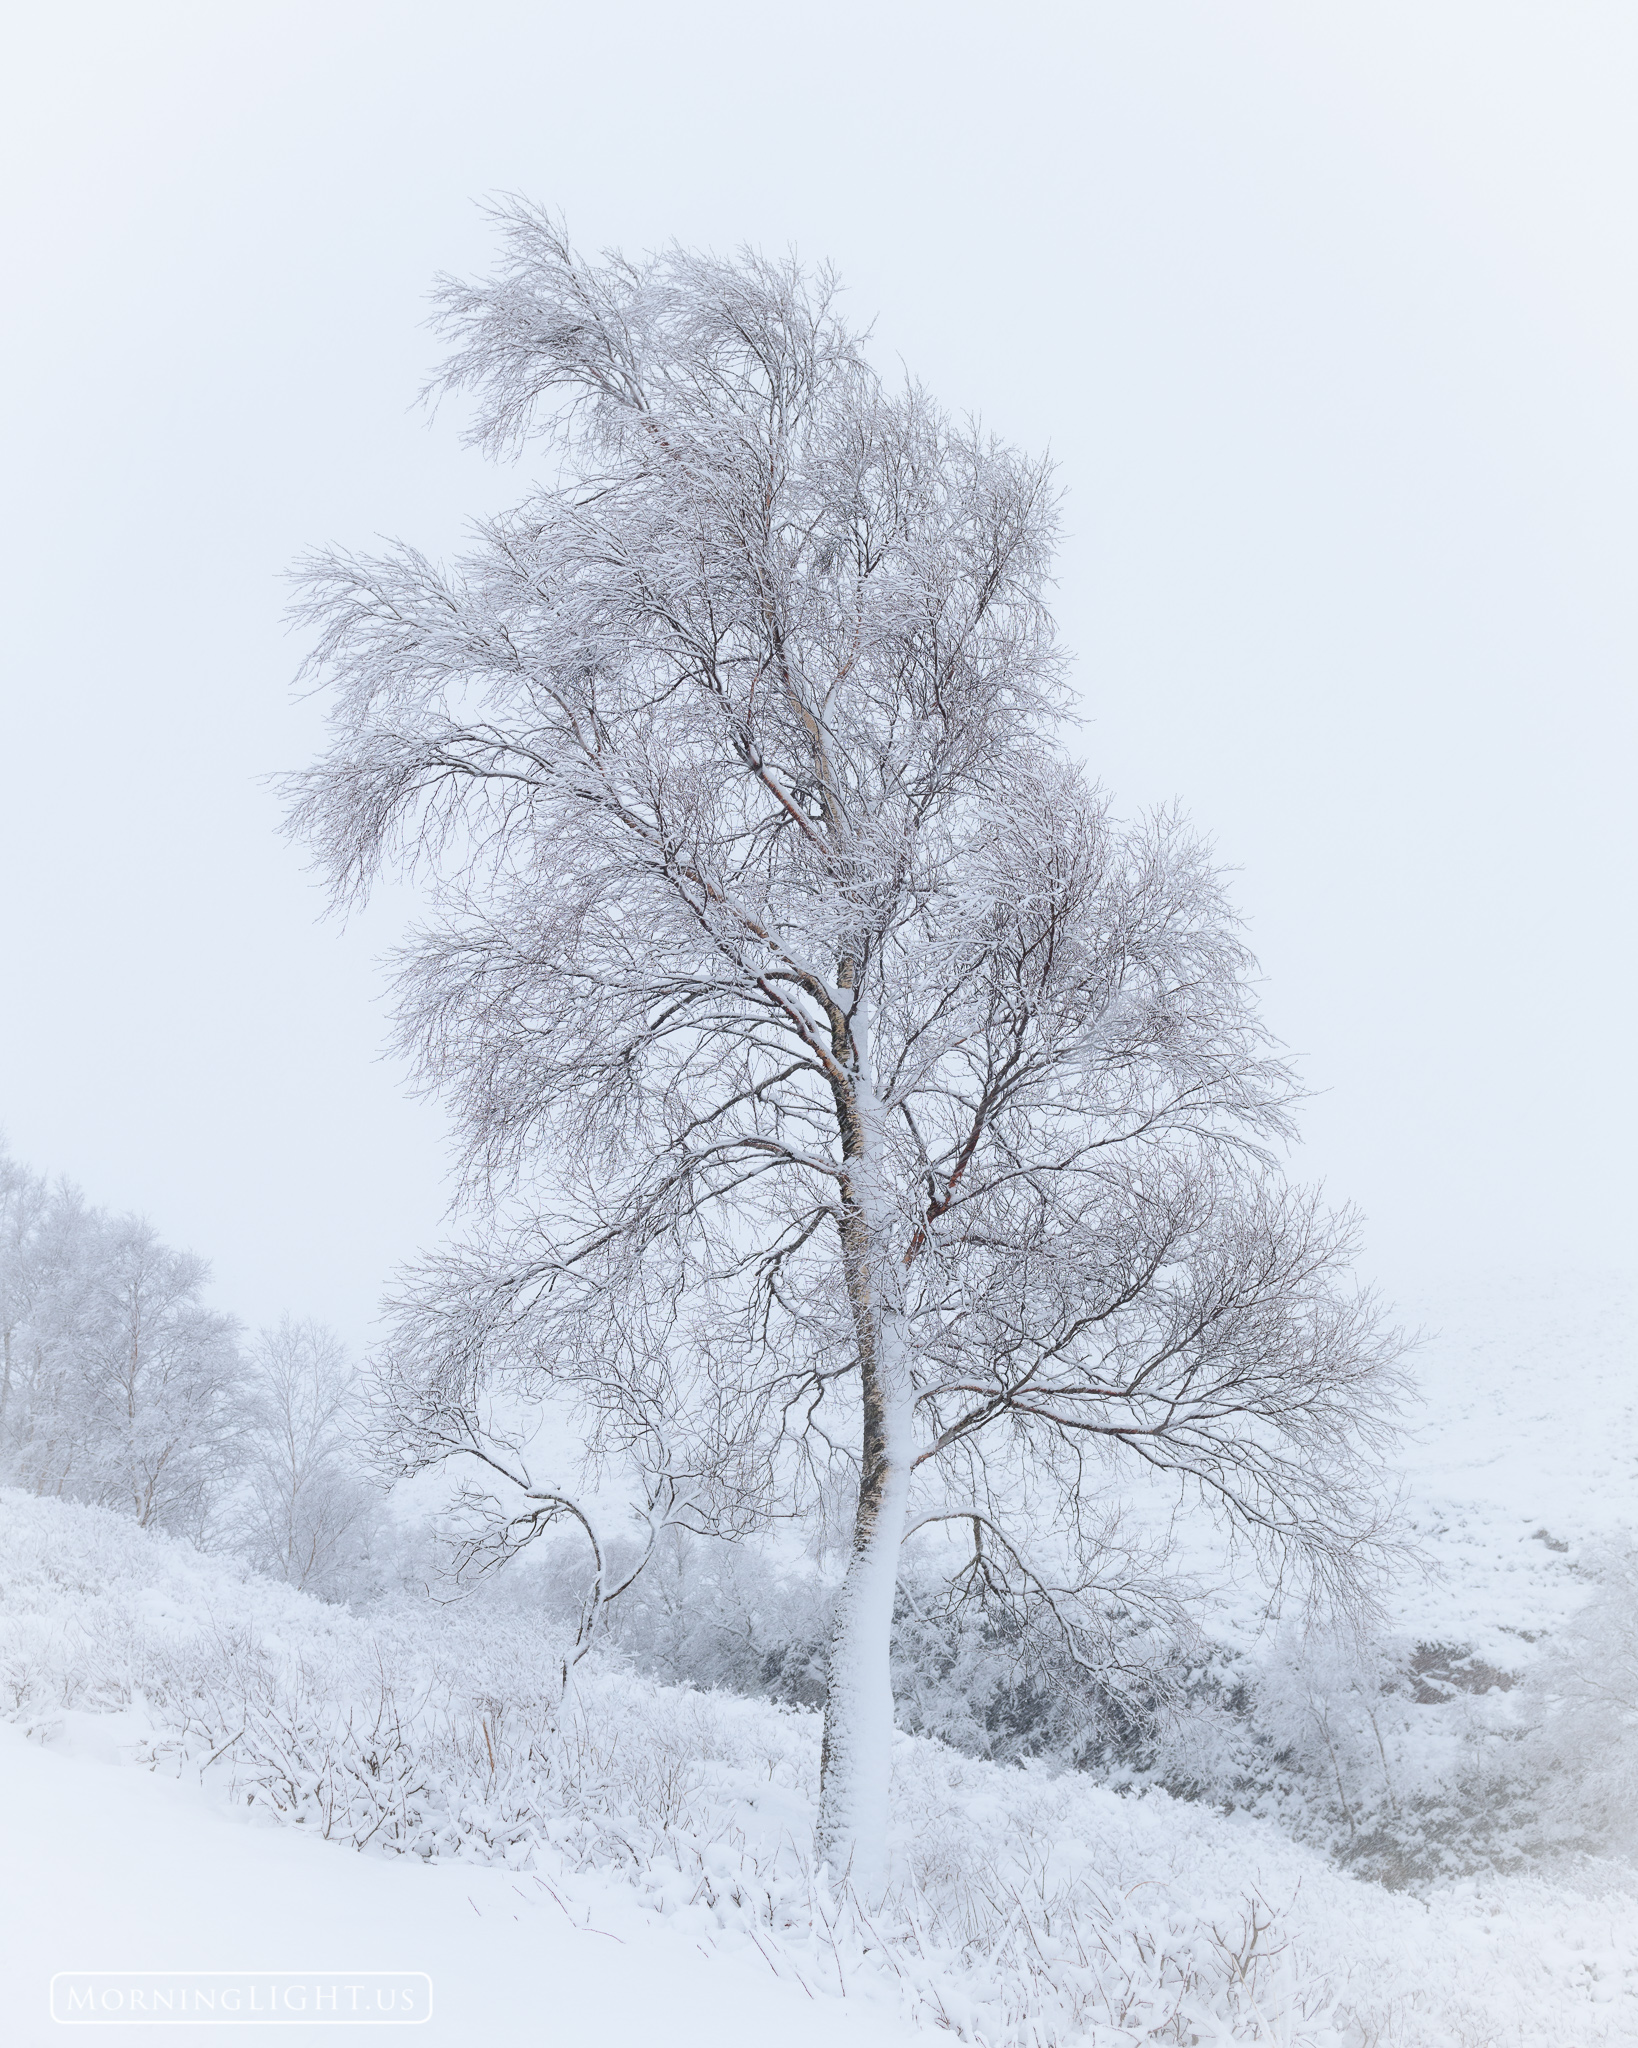 A lone tree bends gracefully under a coat of heavy snow in the Highlands of Scotland.